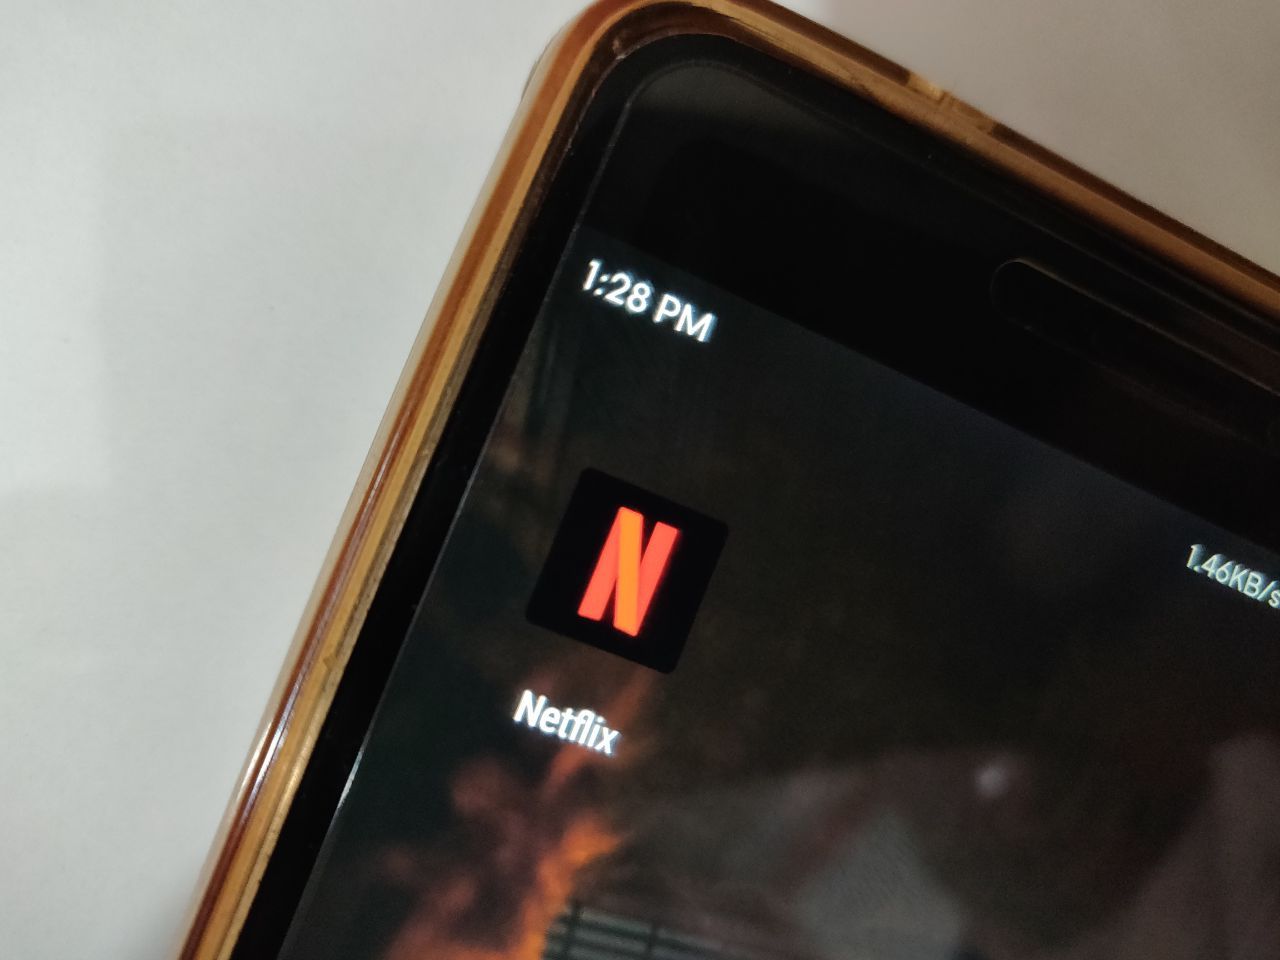 Netflix or Twitter not working on your phone with WiFi? Android Pie could be culprit